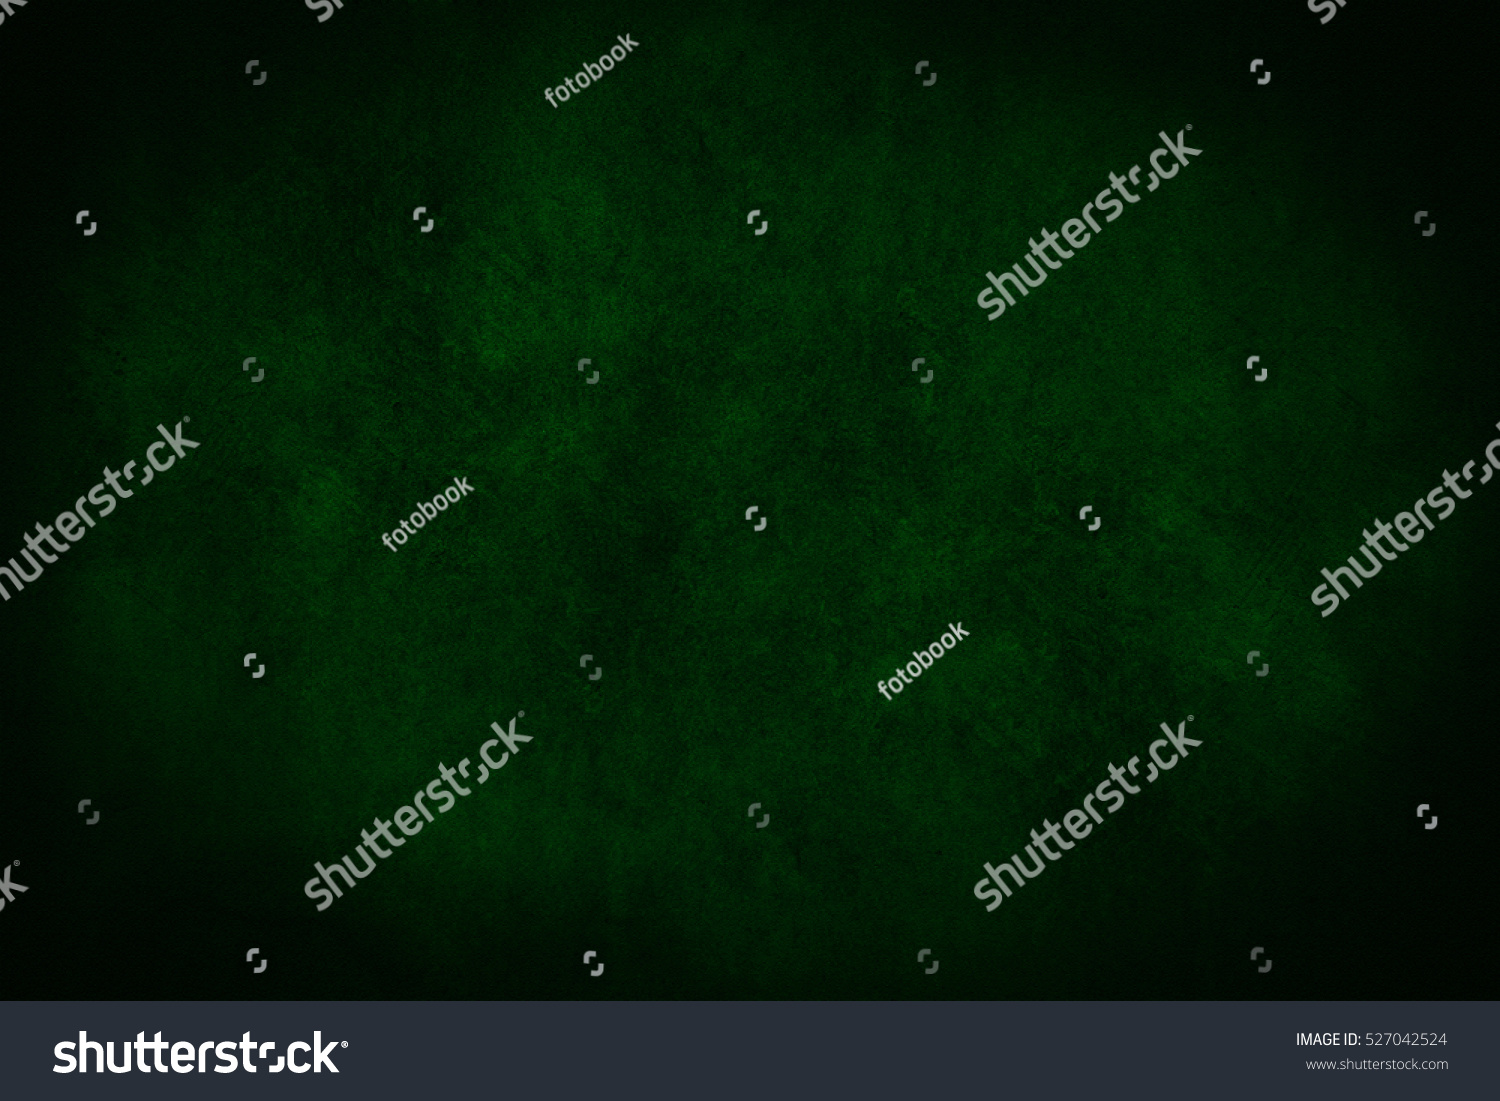 Abstract green background. Christmas background #527042524